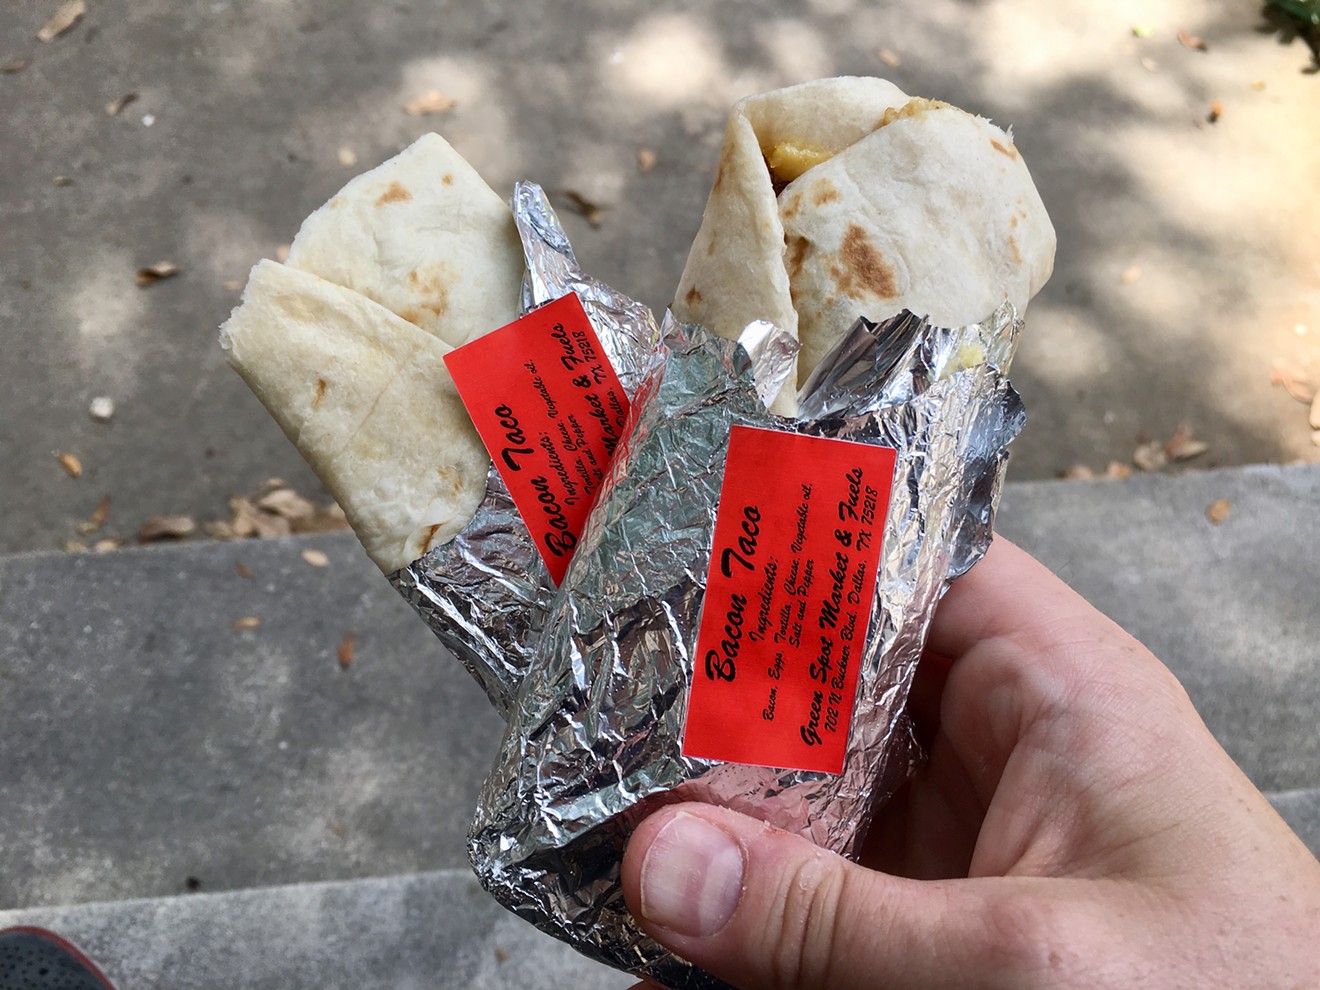 Two bacon and egg tacos ($2.75 each) to-go.